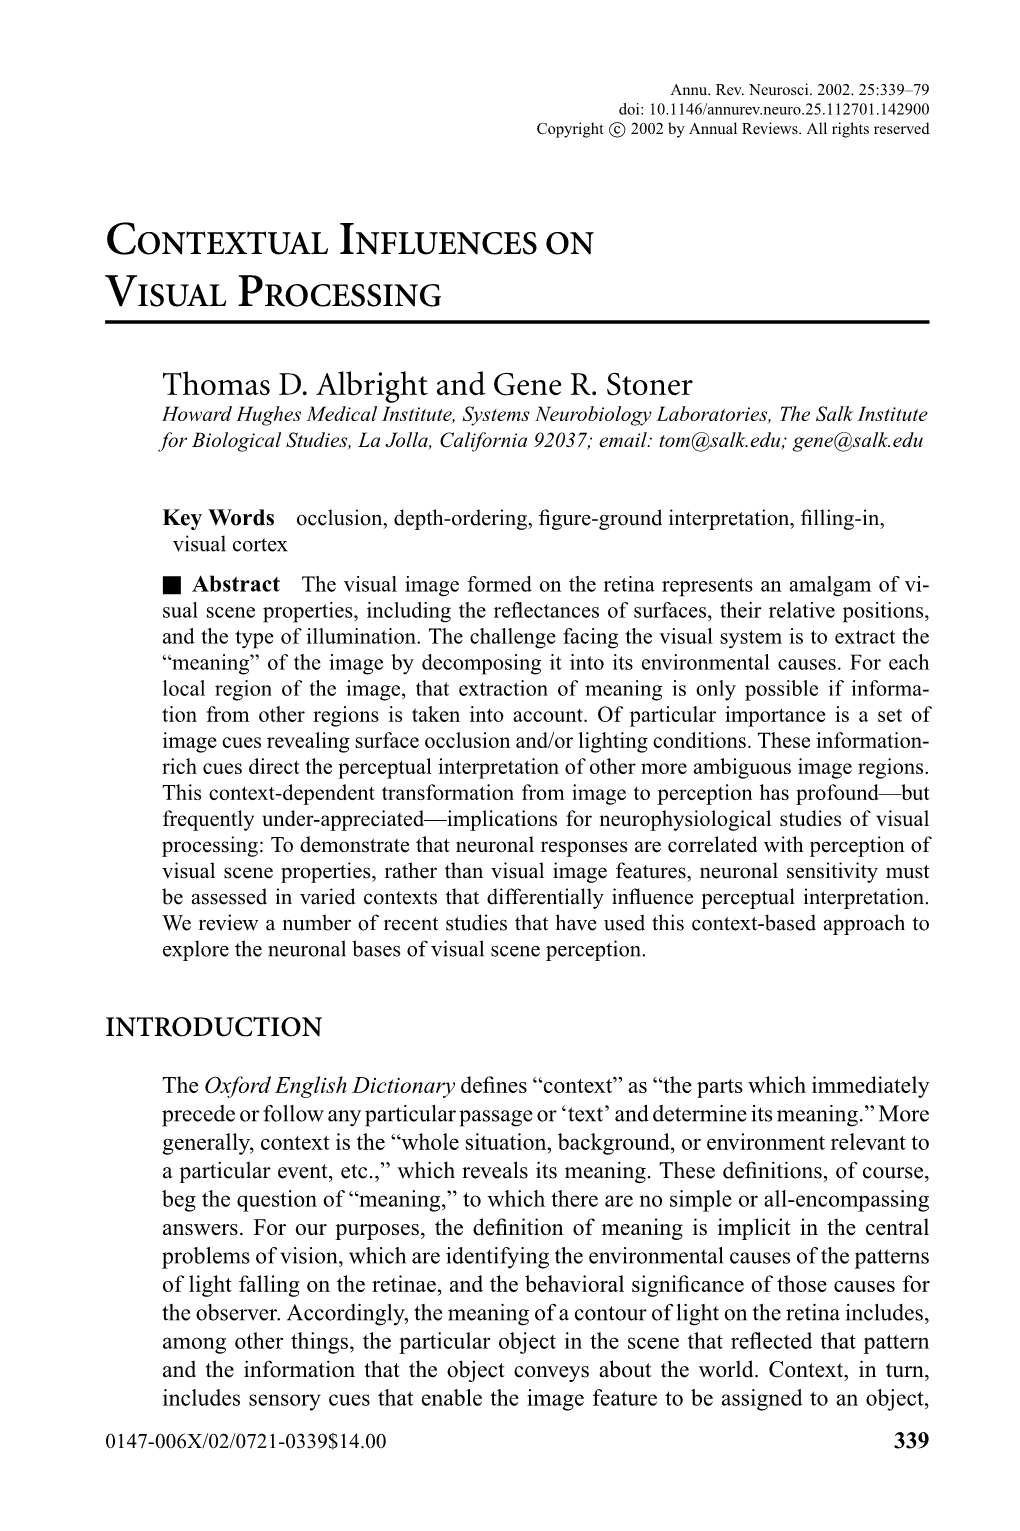 Contextual Influences on Visual Processing